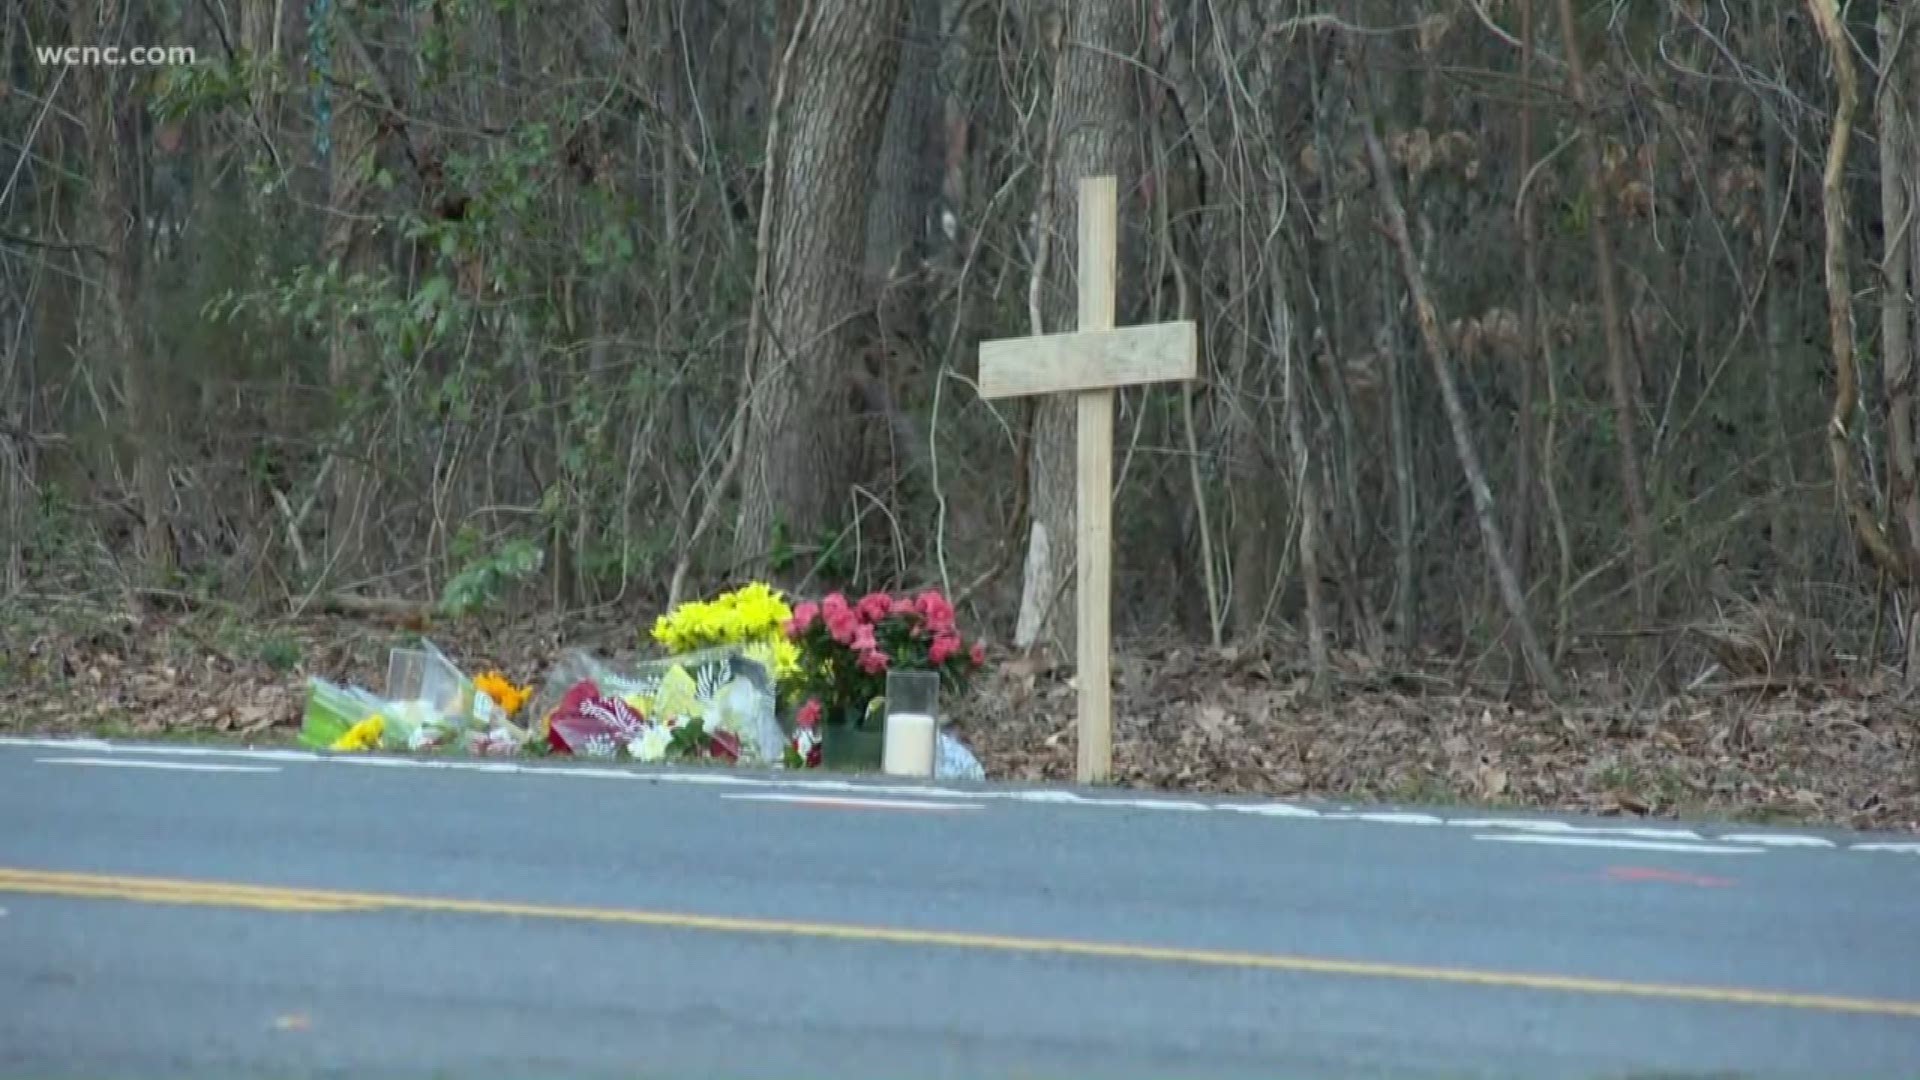 The Fort Mill Police Department responded to Pleasant Road at Whitley Road after police said 14-year-old Brian Orkofsky was struck while trying to cross the street.